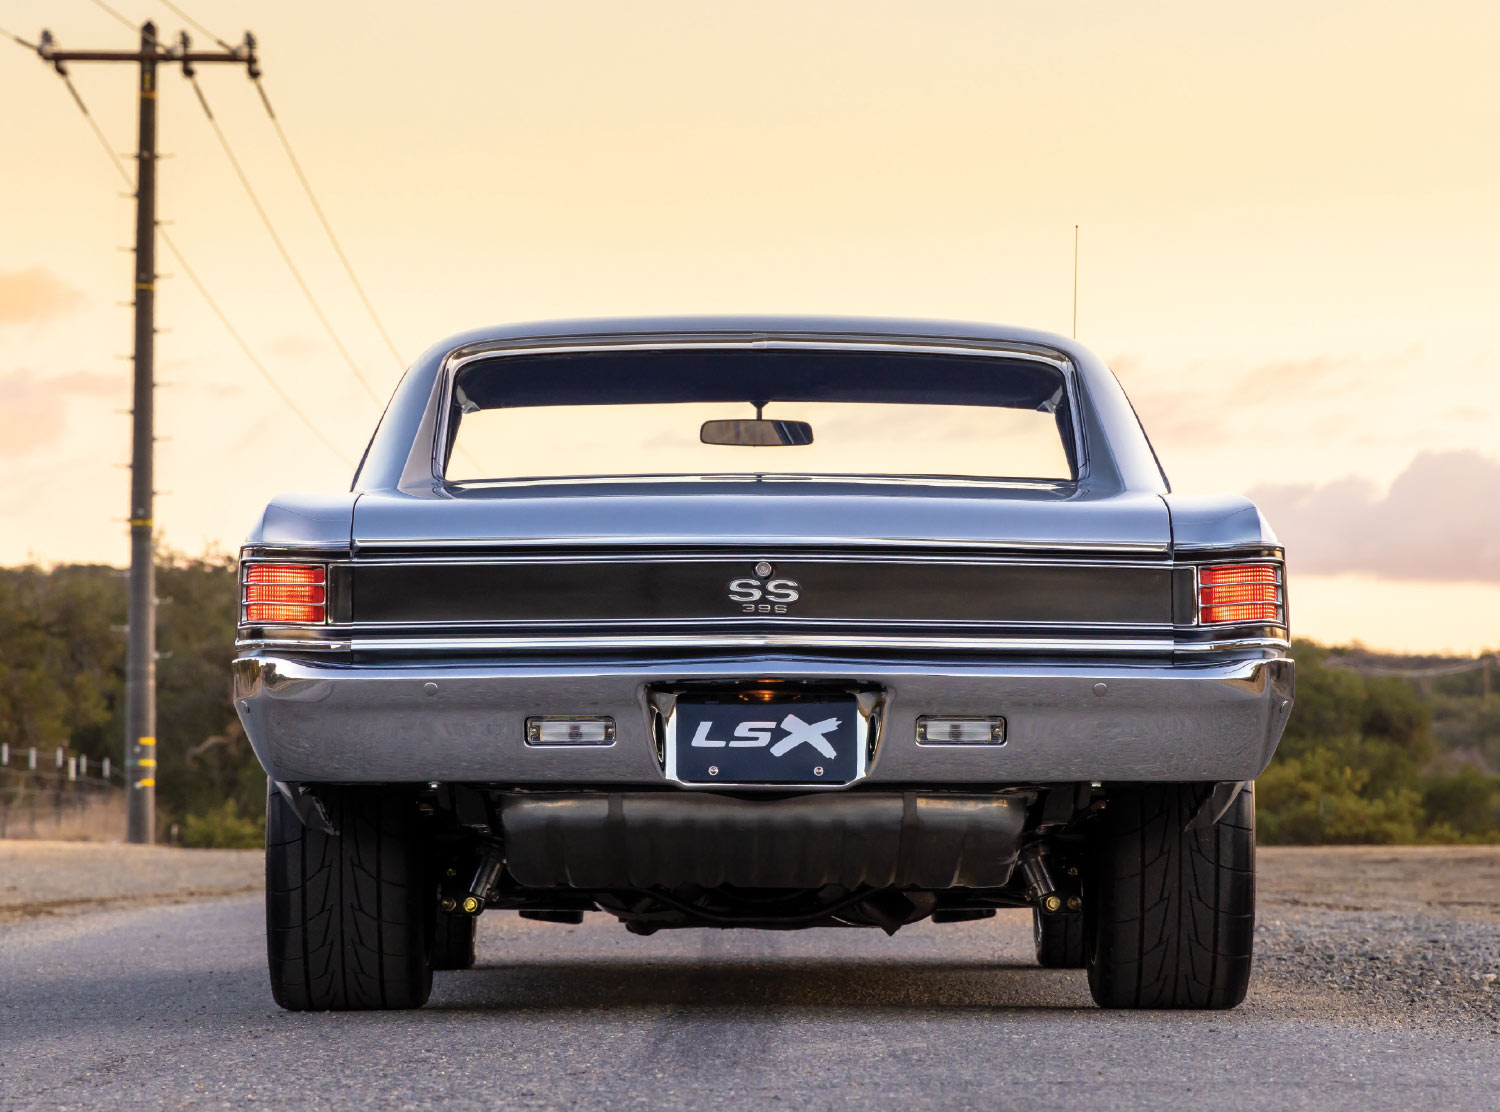 Rear view of the 1967 Chevelle